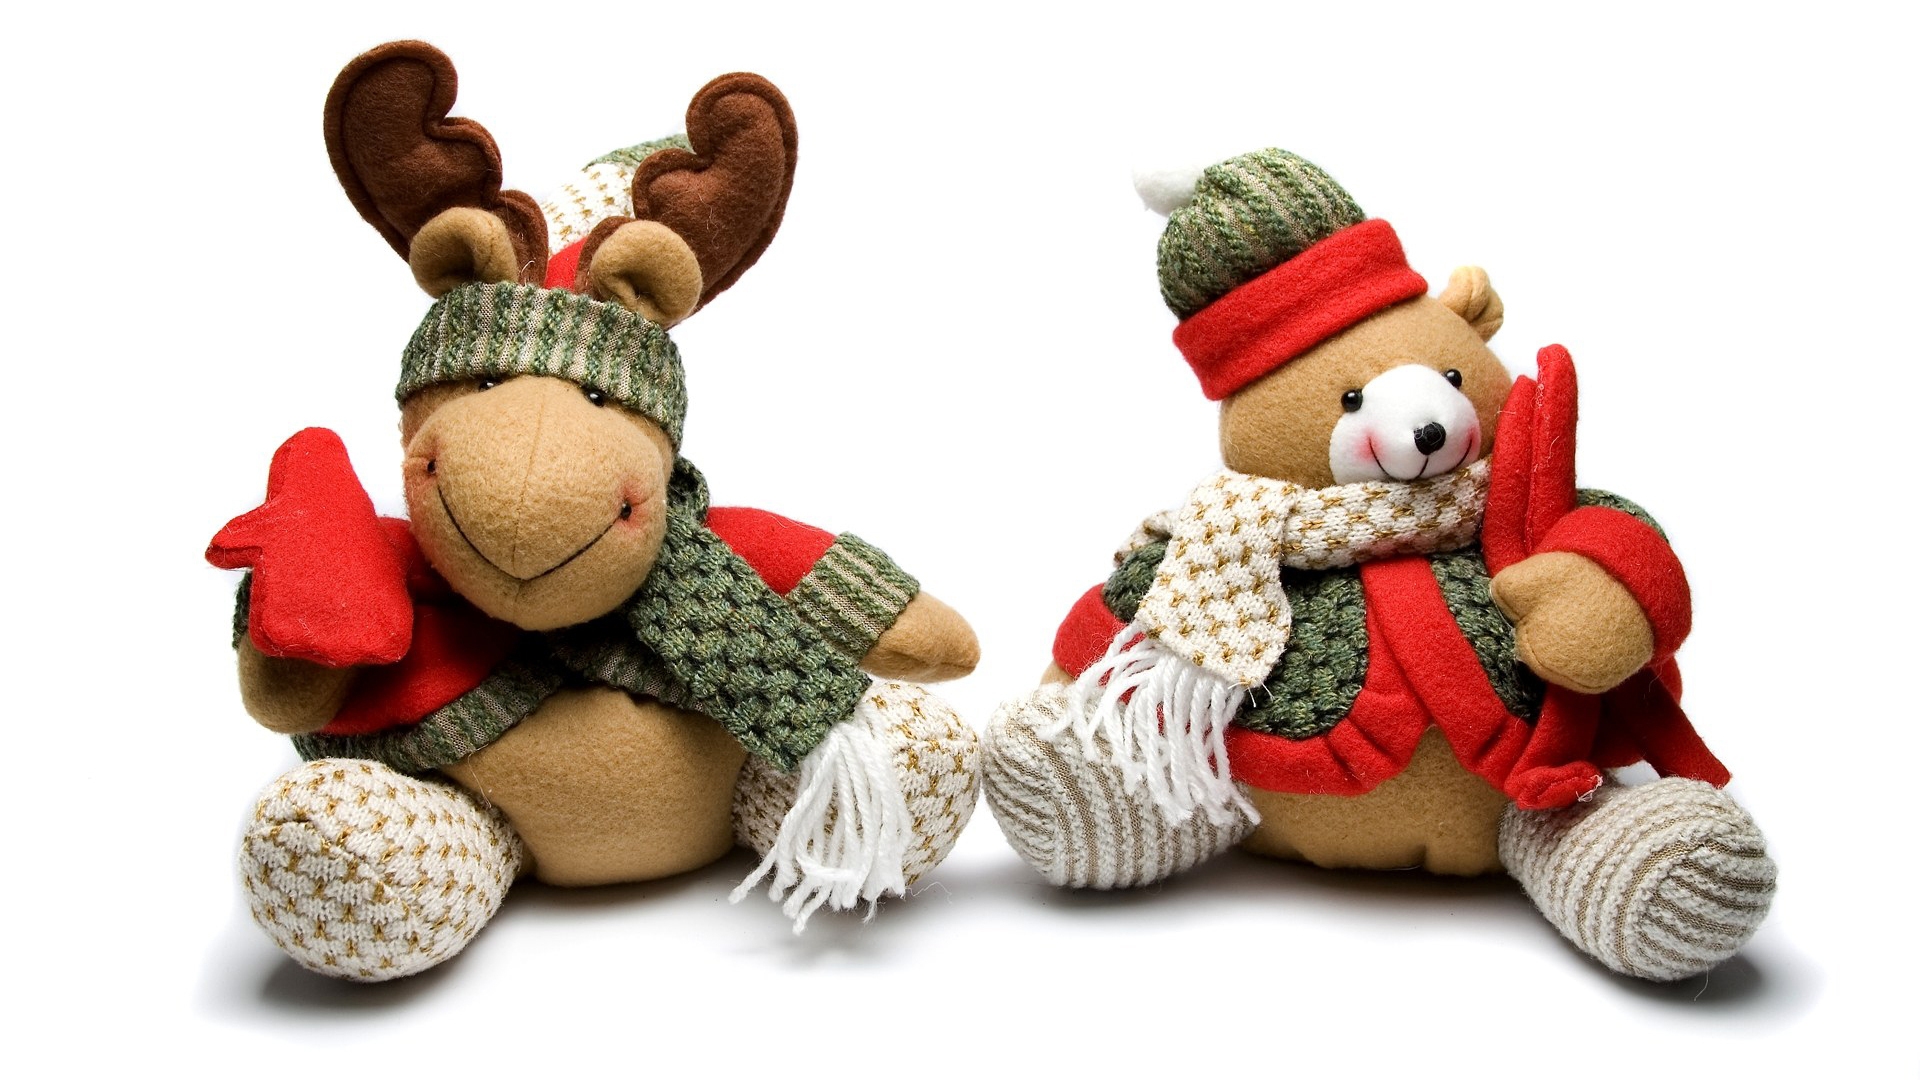 Teddy Bear and Reindeer Toy for 1920 x 1080 HDTV 1080p resolution